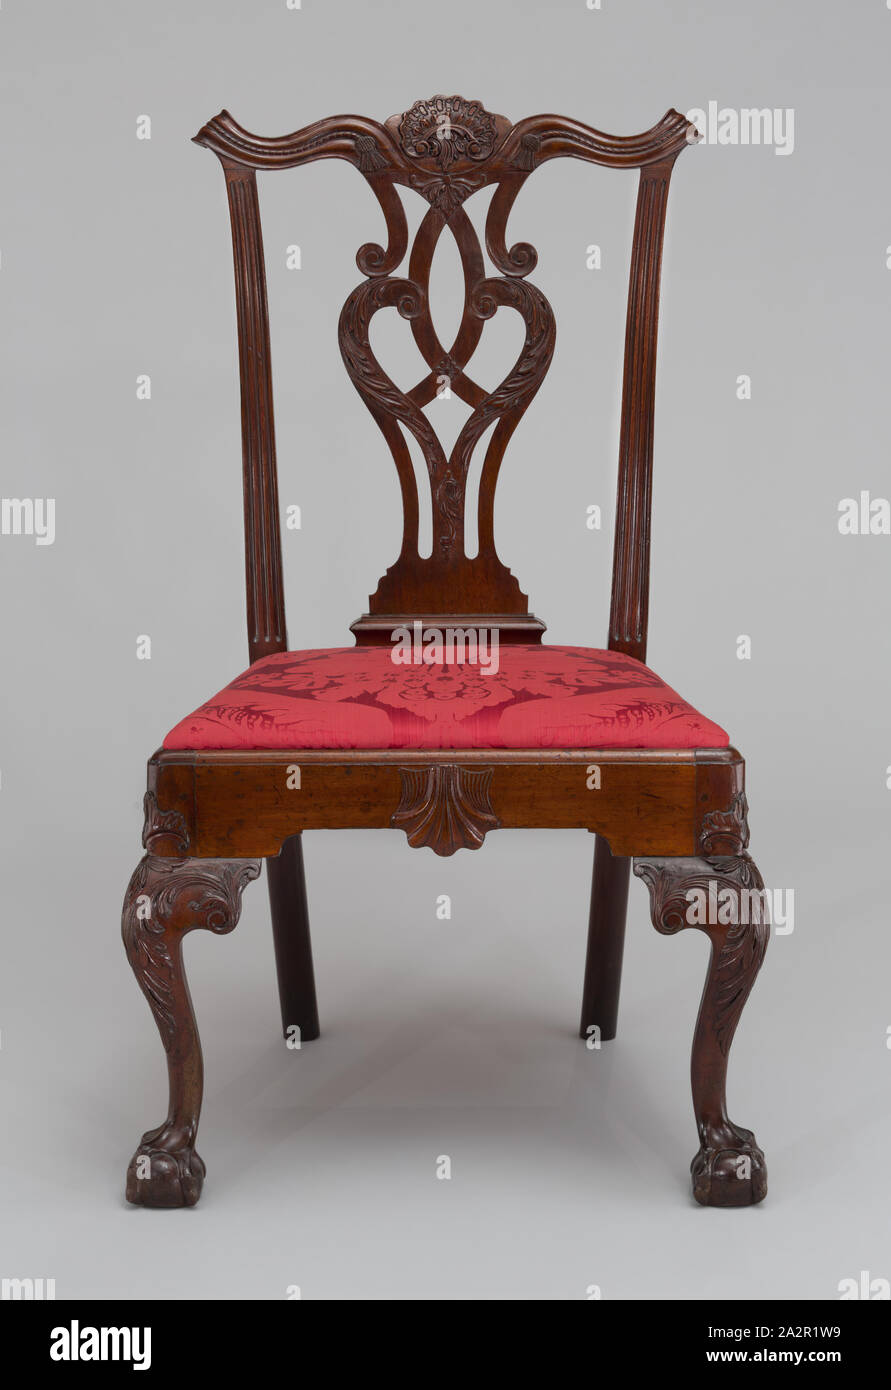 Unknown (American), Chair, between 1760 and 1790, mahogany, Overall: 40 × 23 1/2 × 21 1/2 inches (101.6 × 59.7 × 54.6 cm Stock Photo